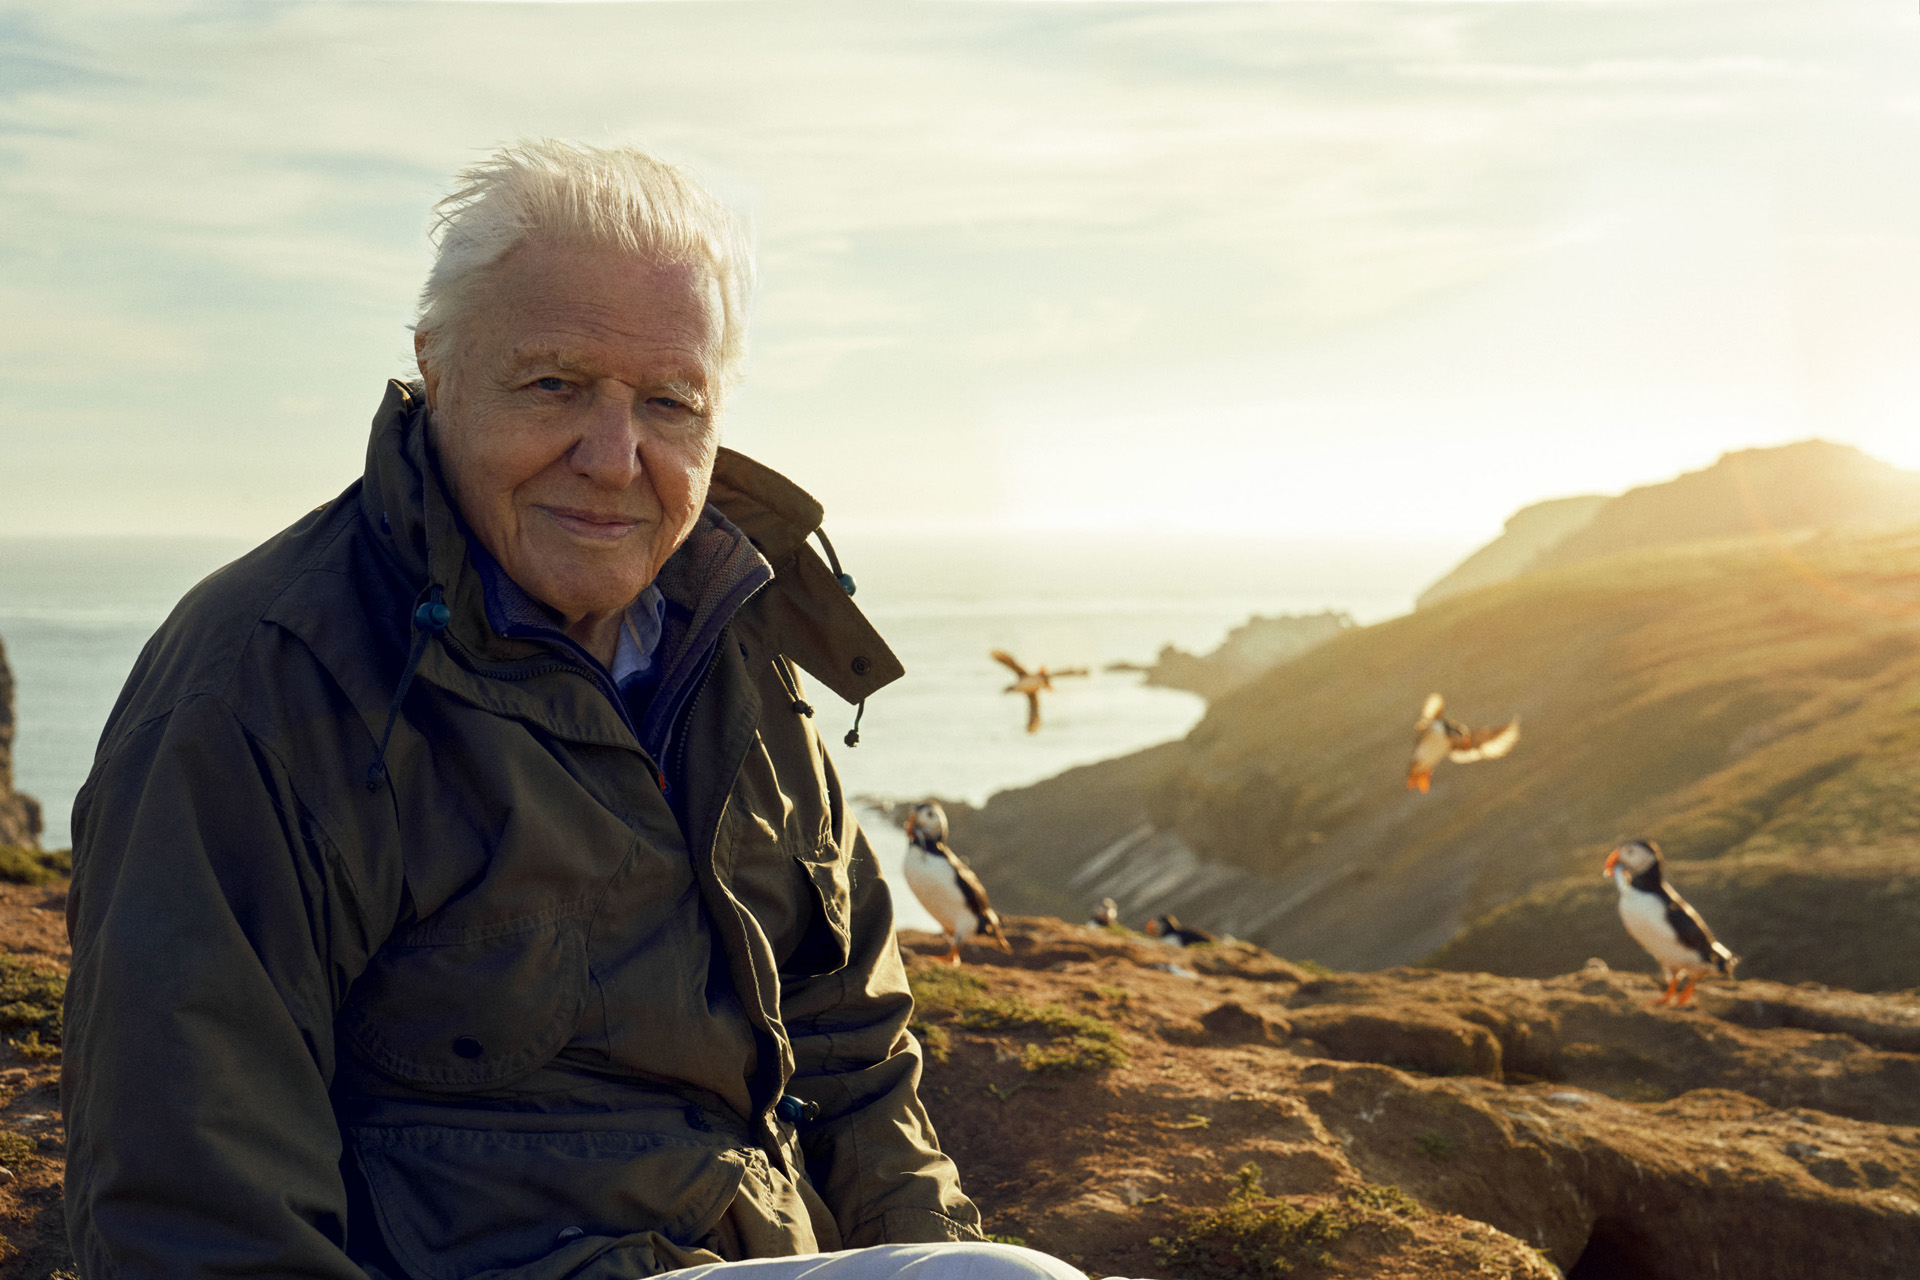 Sir David Attenborough,Sir David Attenborough, filming for Wild Isles series, next to Common puffins (Fratercula arctica), Skomer Island, off Pembrokeshire coast, Wales